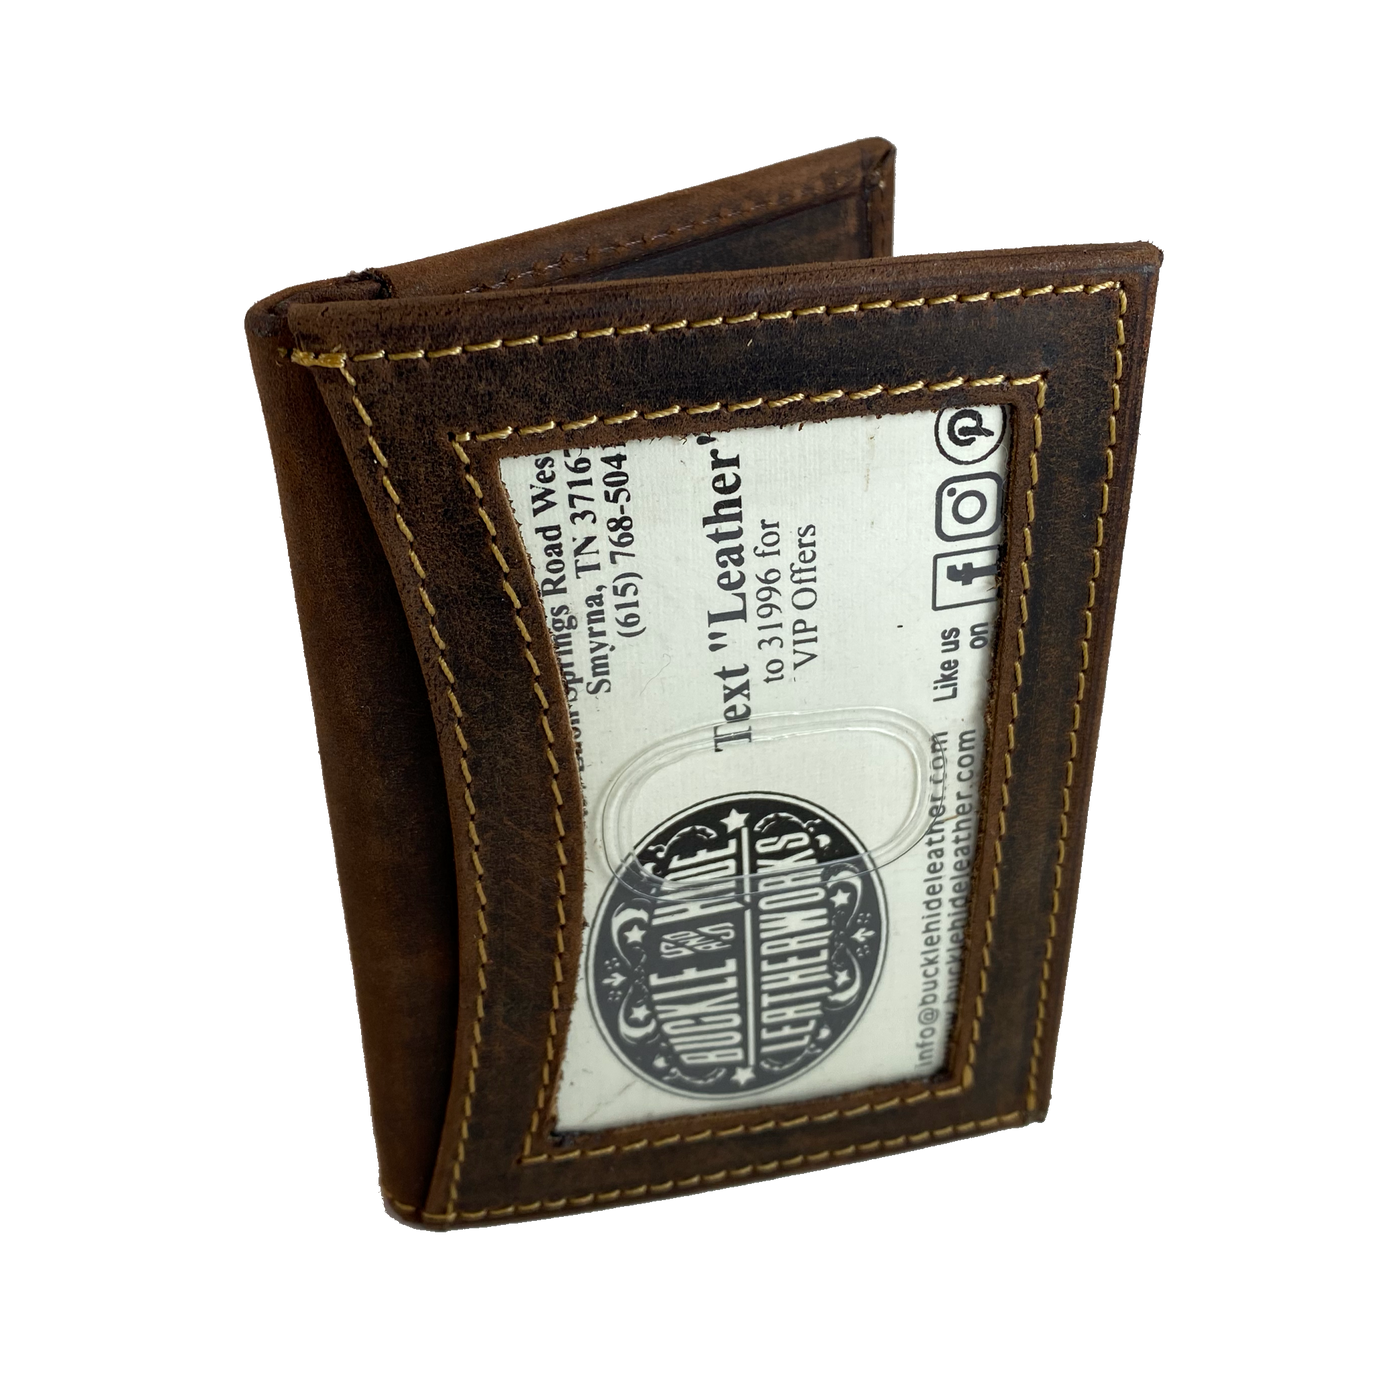 RFID protected Front Pocket Style in popular Distressed Brown with 3 inside card slots, cash pocket and DOUBLE I.D. pockets. one outside one inside, great for drivers license, work I.D. or carry permit. A lot of room for such a small wallet. Though it is imported it is a great value that's Buckle and Hide approved.